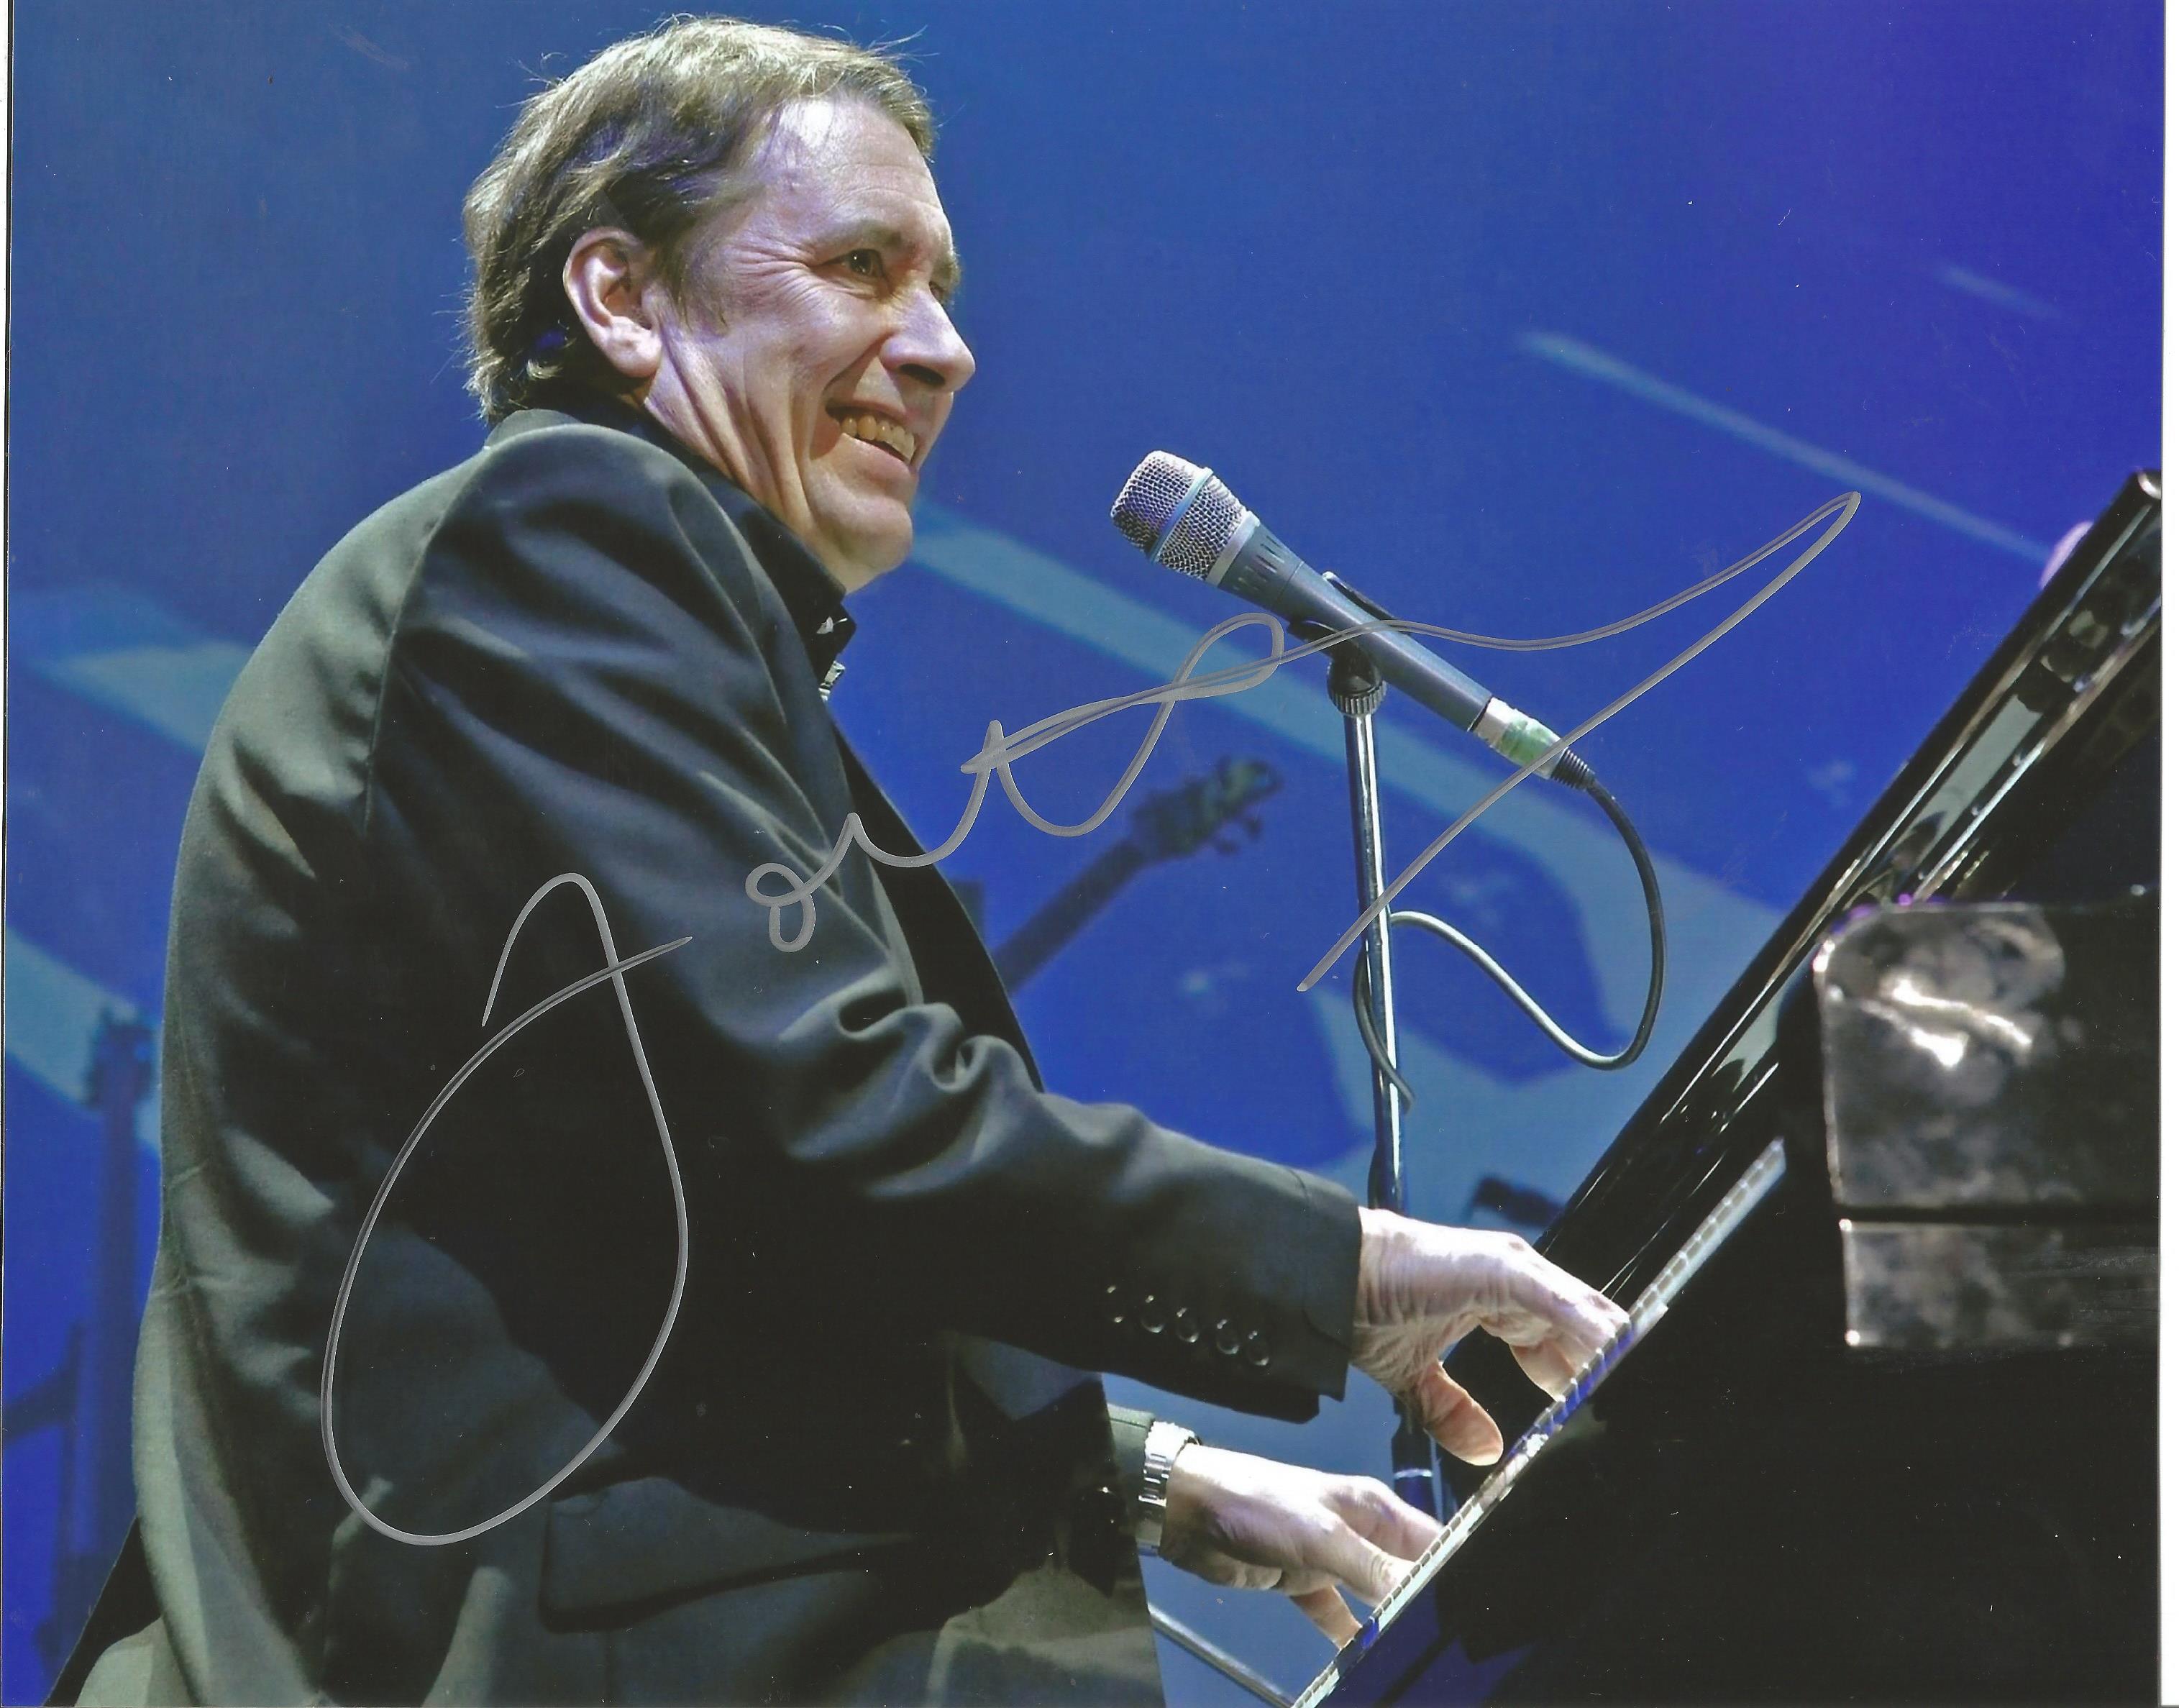 Jools Holland signed 10x8 colour photo. Julian Miles Holland, OBE, DL (born 24 January 1958) is an